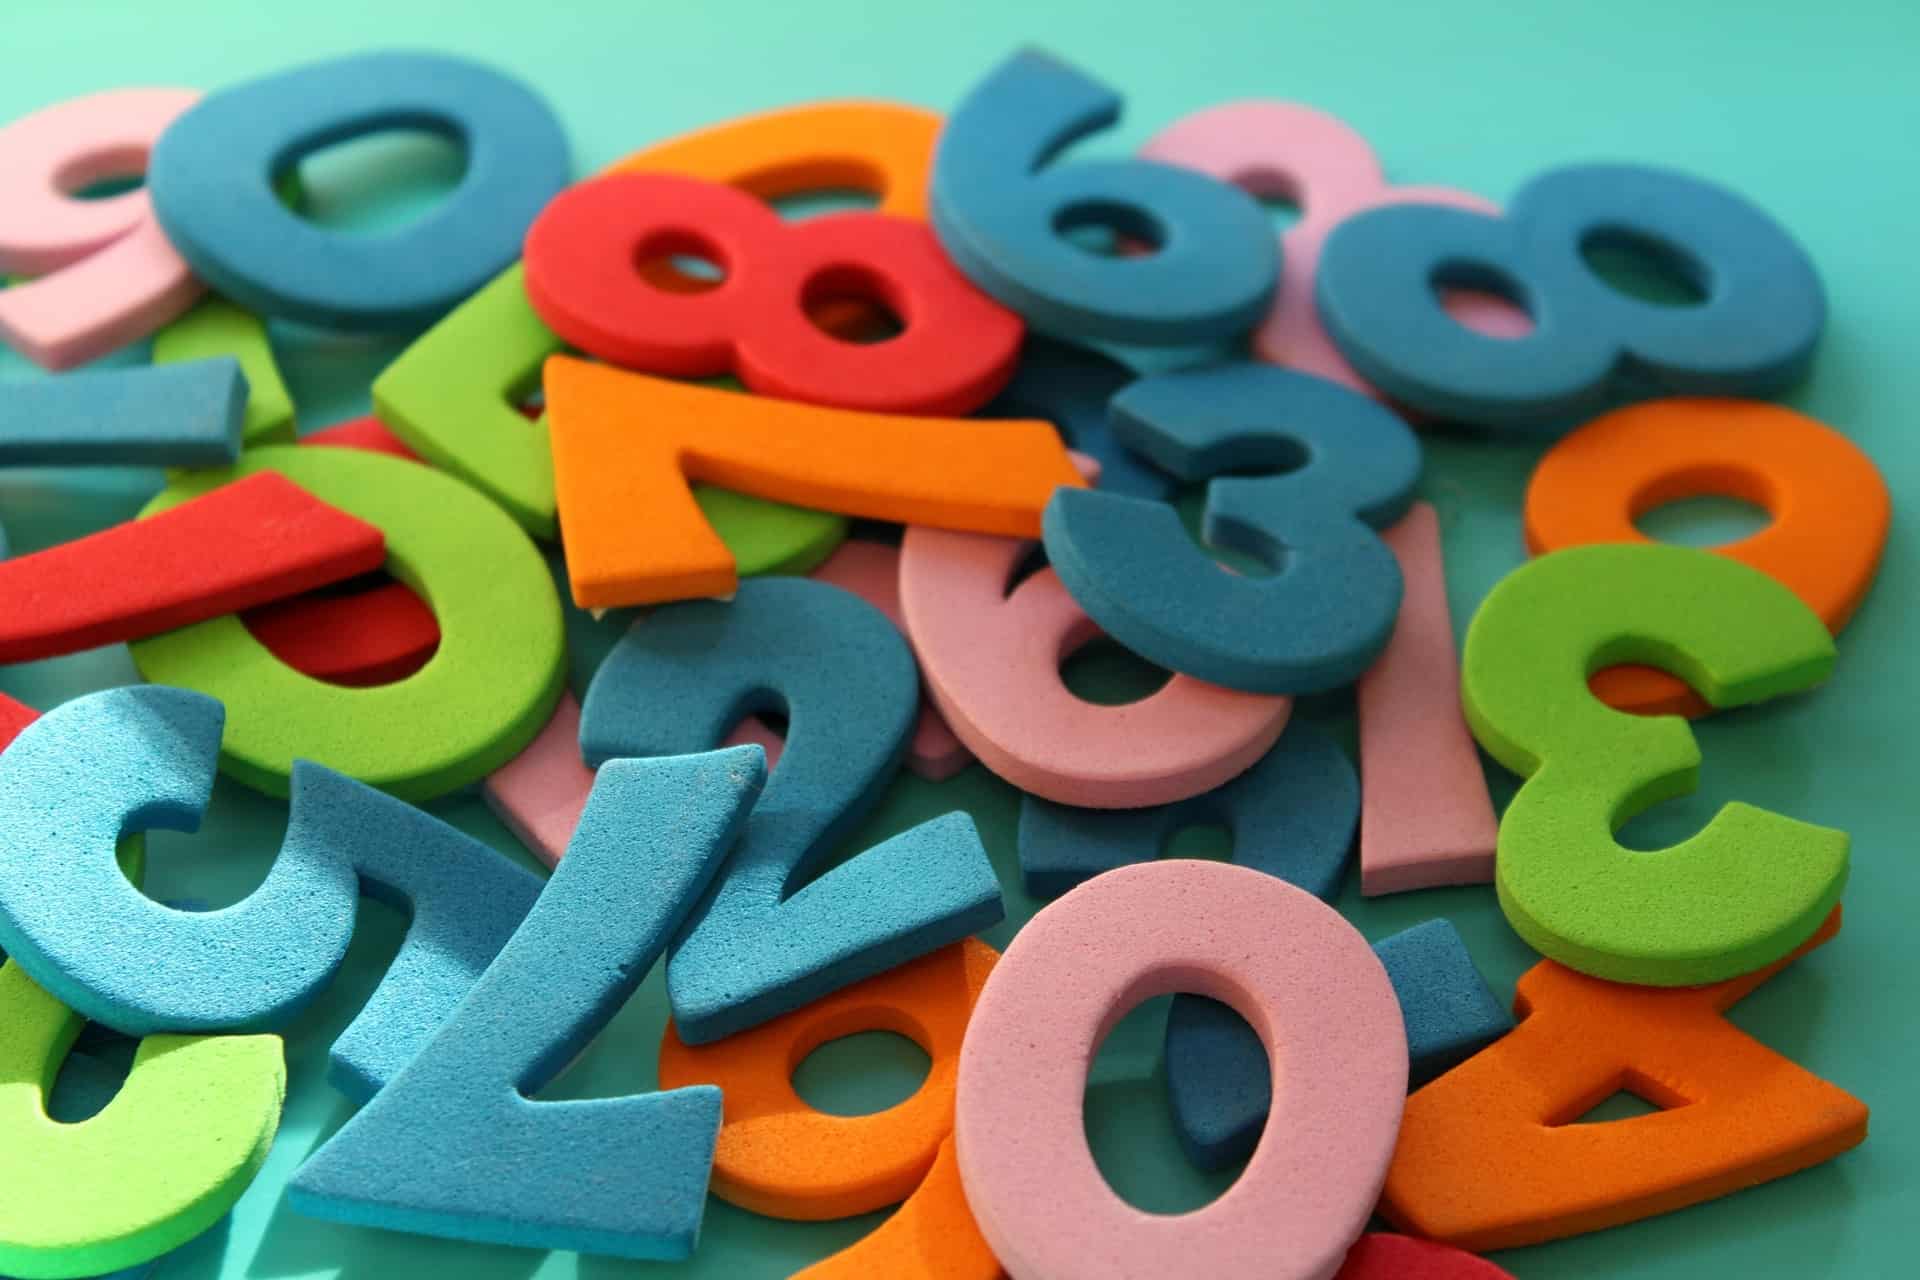 Colorful rubber numbers